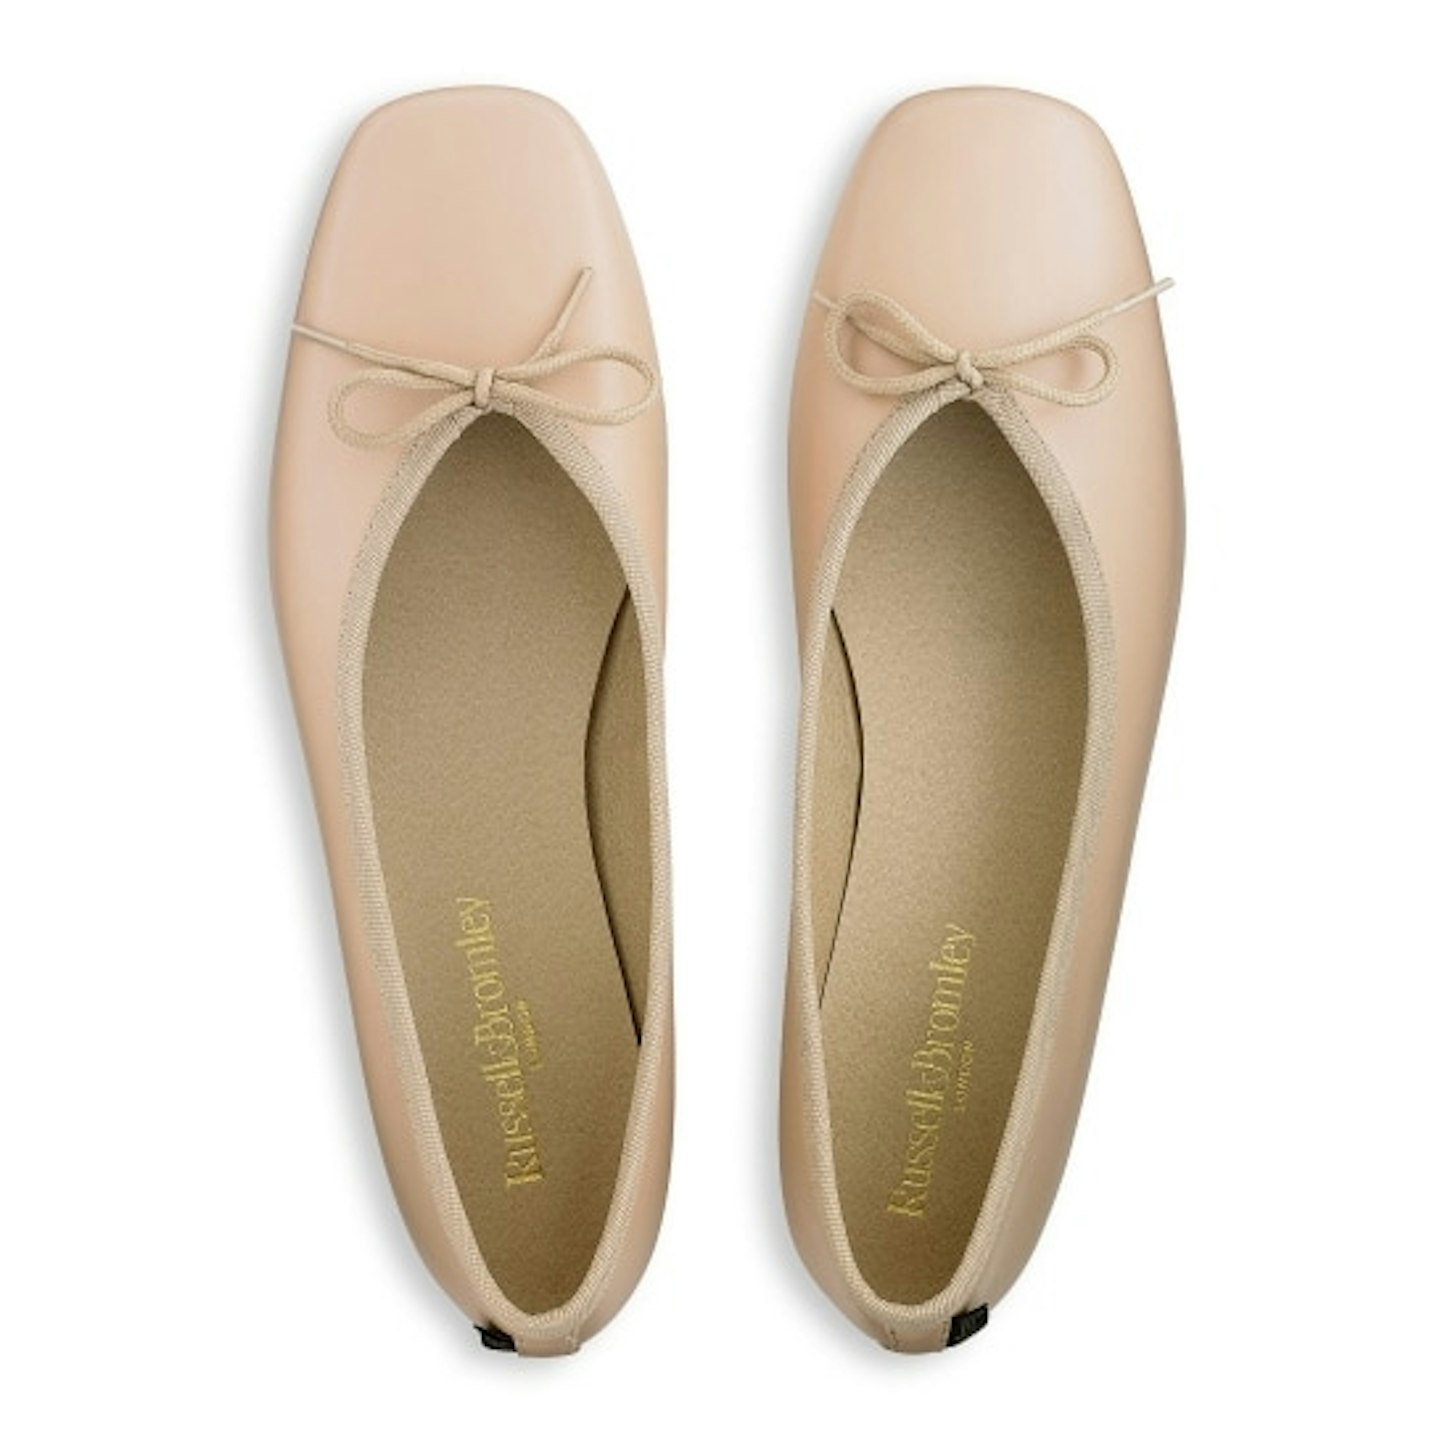 Russell & Bromley, Angelina Ballet Pump, £145